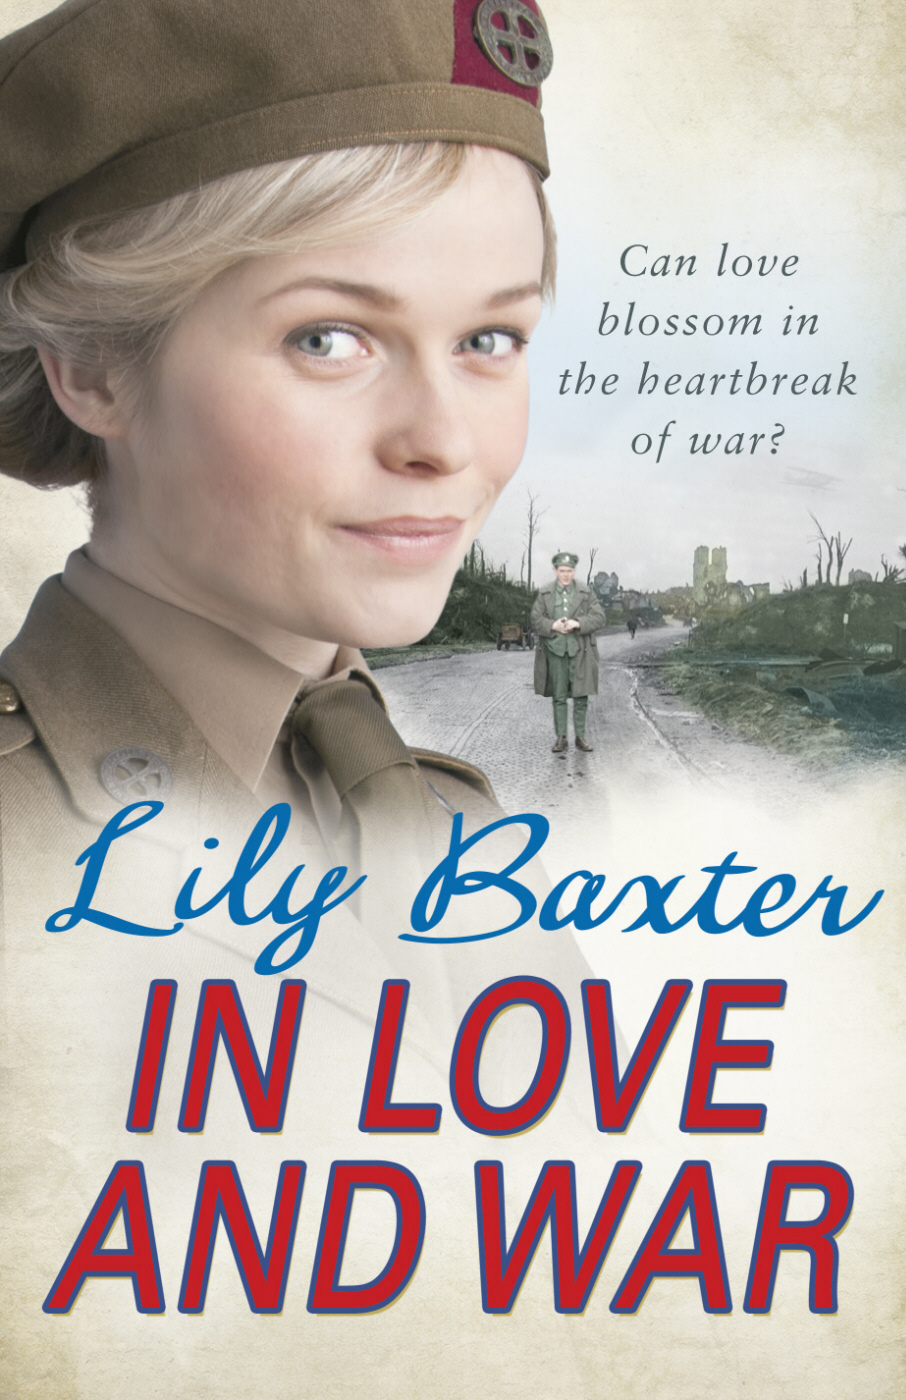 In Love and War (2014) by Lily Baxter